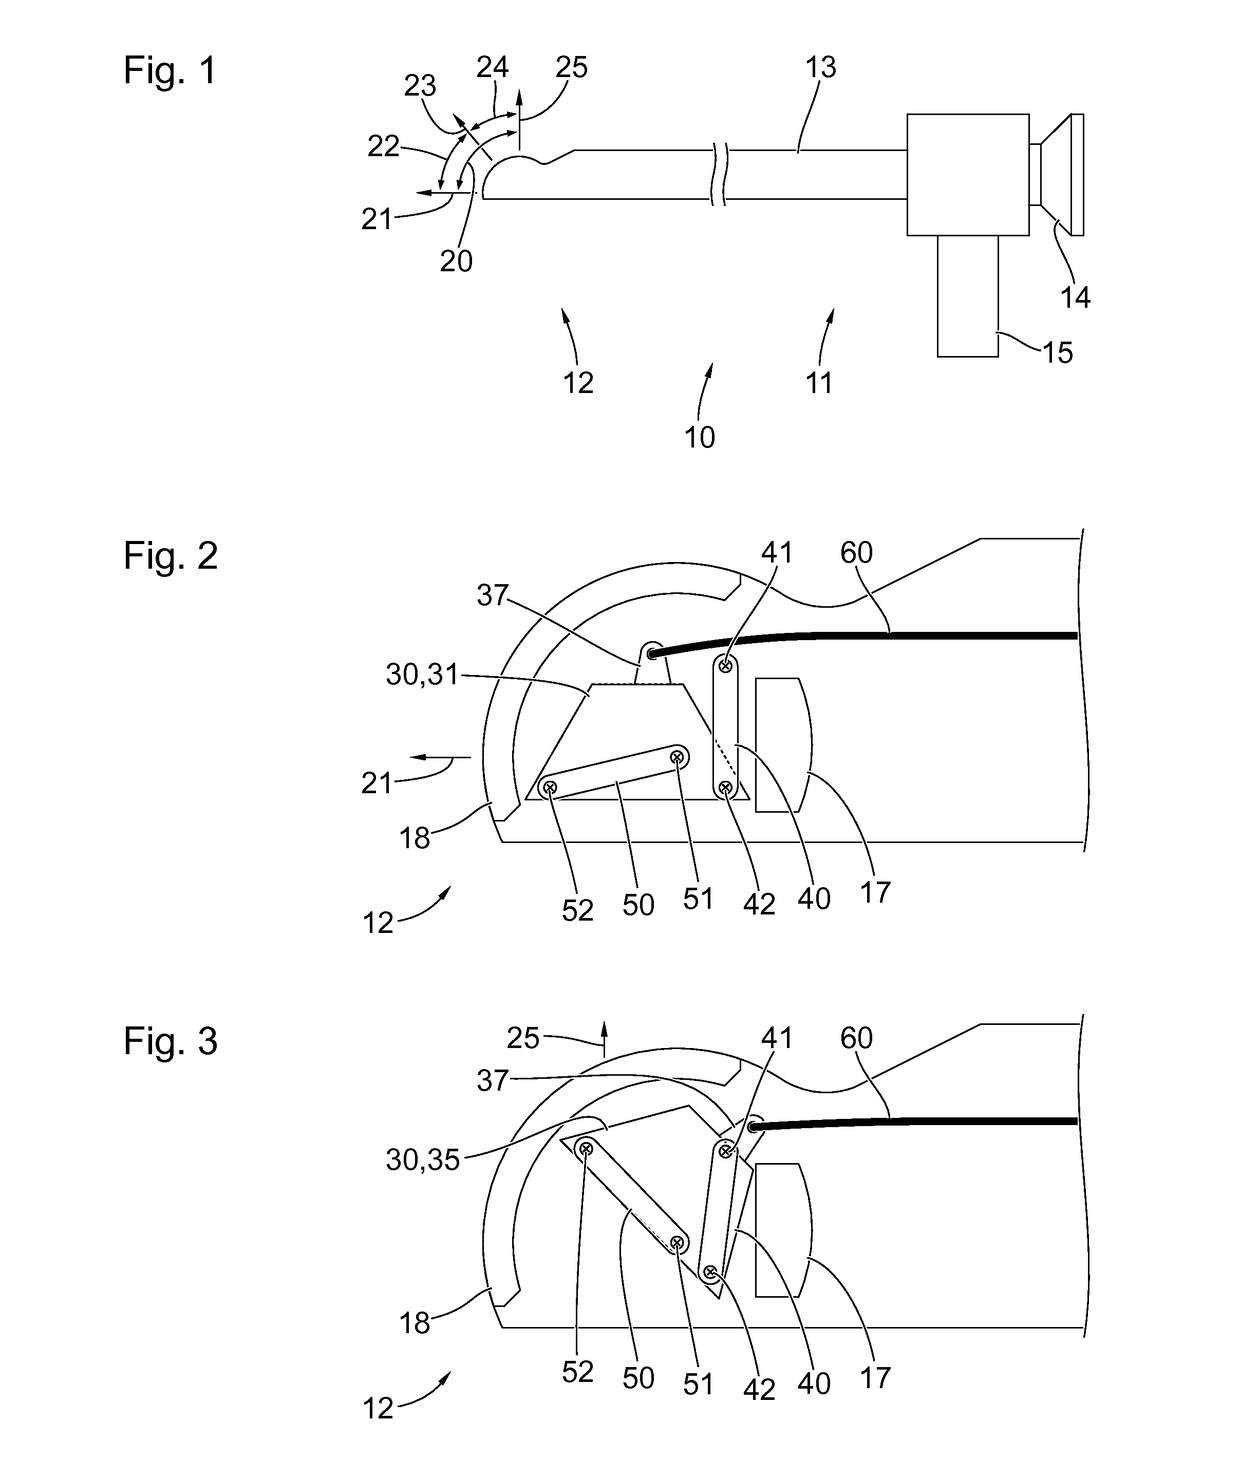 Endoscope with adjustable viewing angle